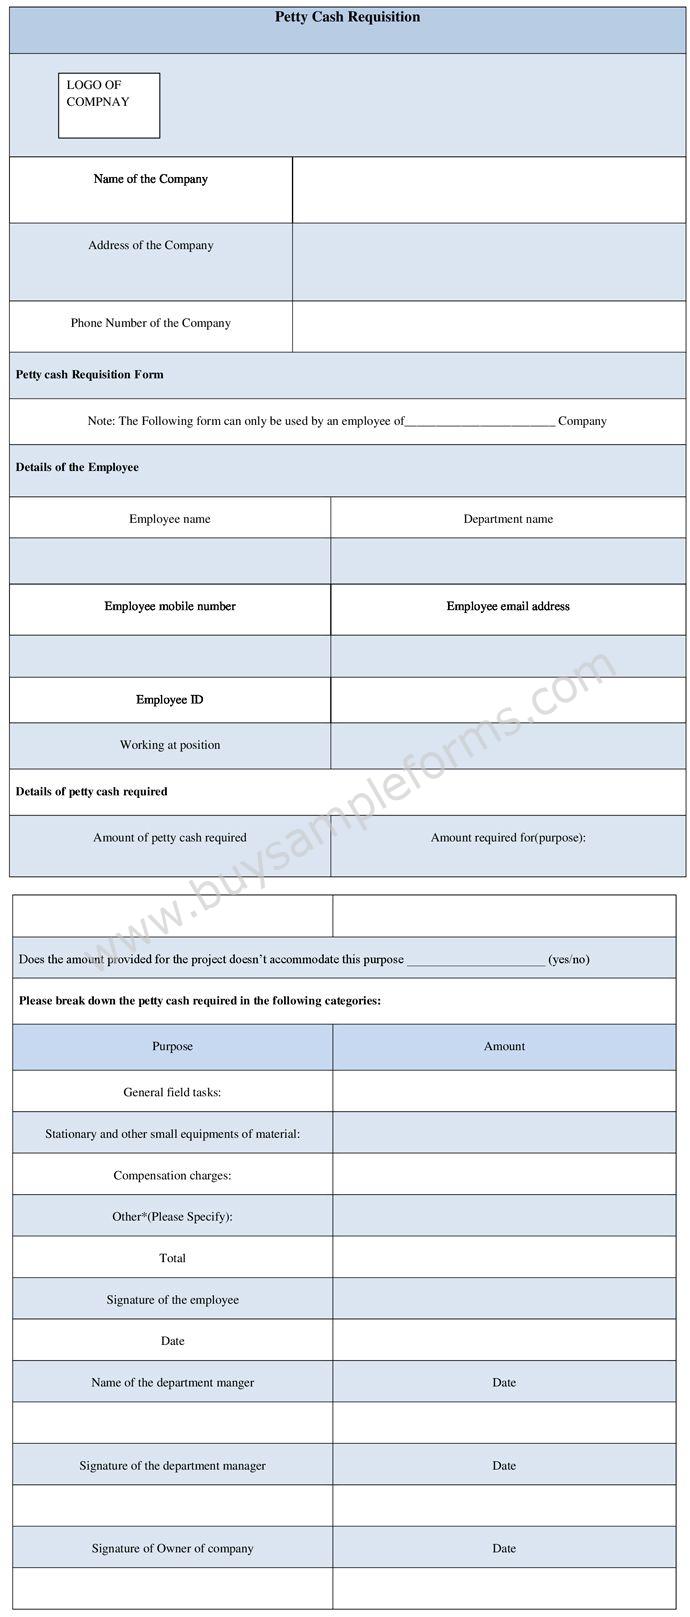 Petty Cash Requisition Form Word – Sample Requisition Form Template